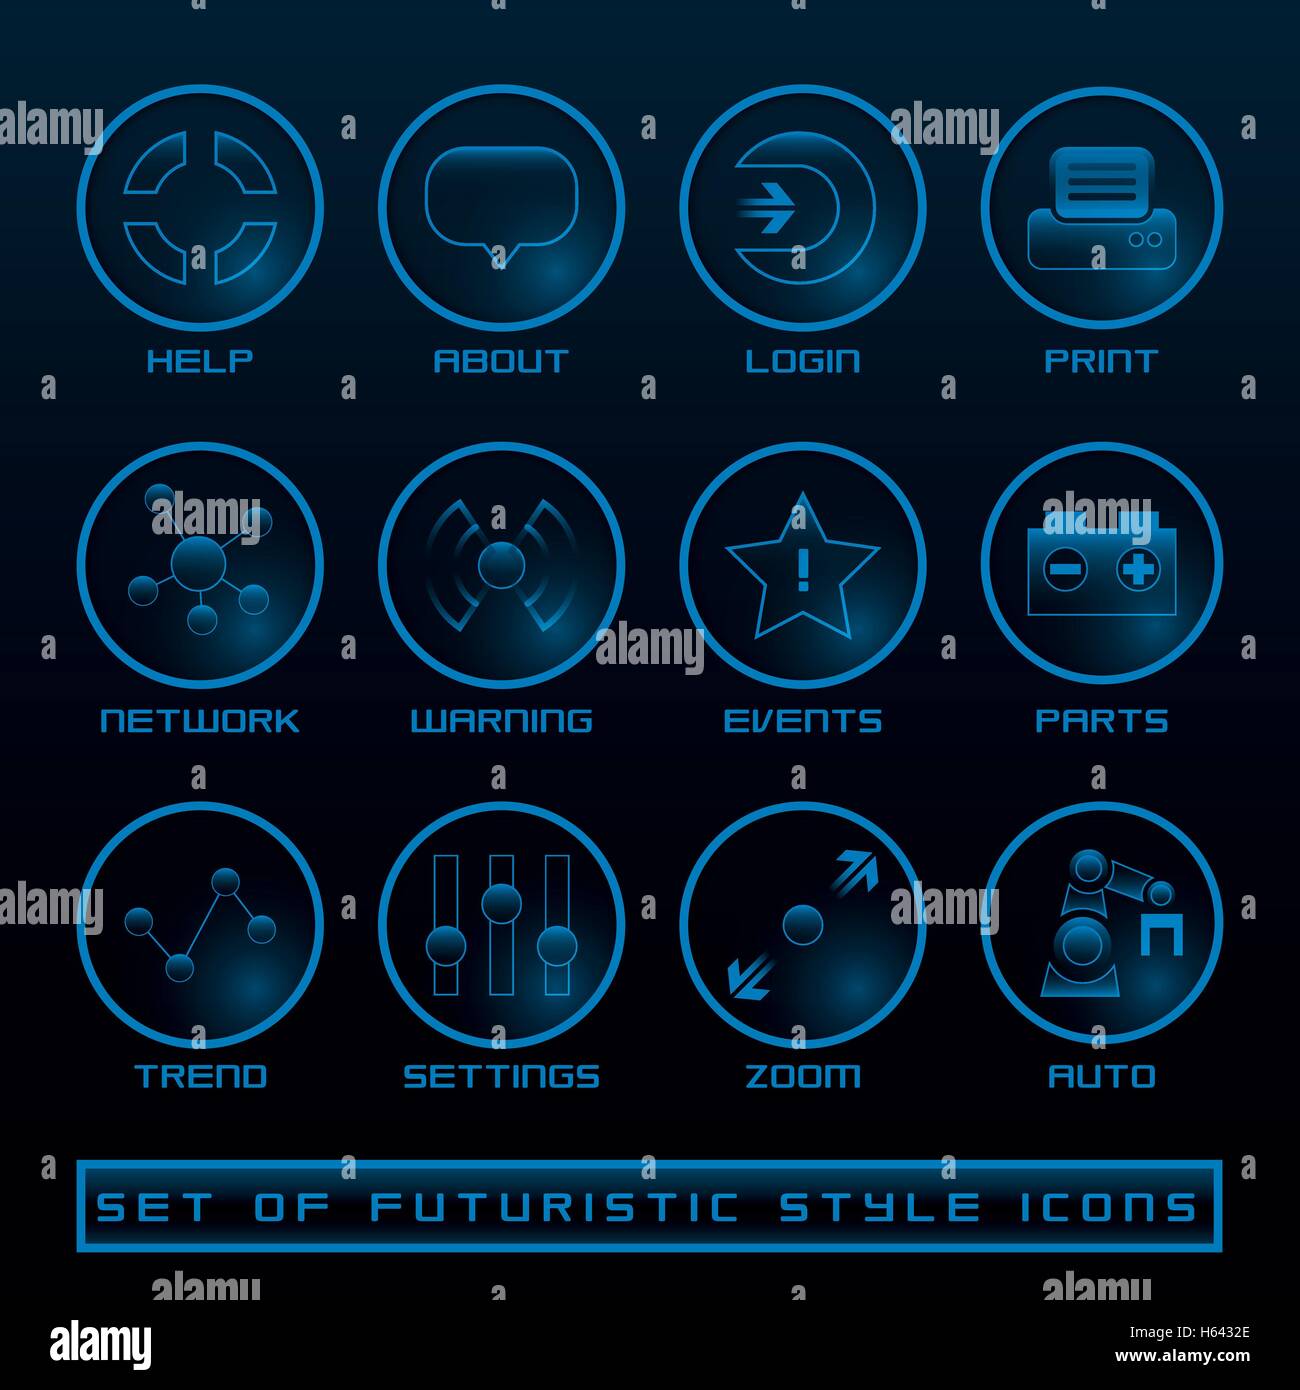 Moon - User Interface & Gesture Icons